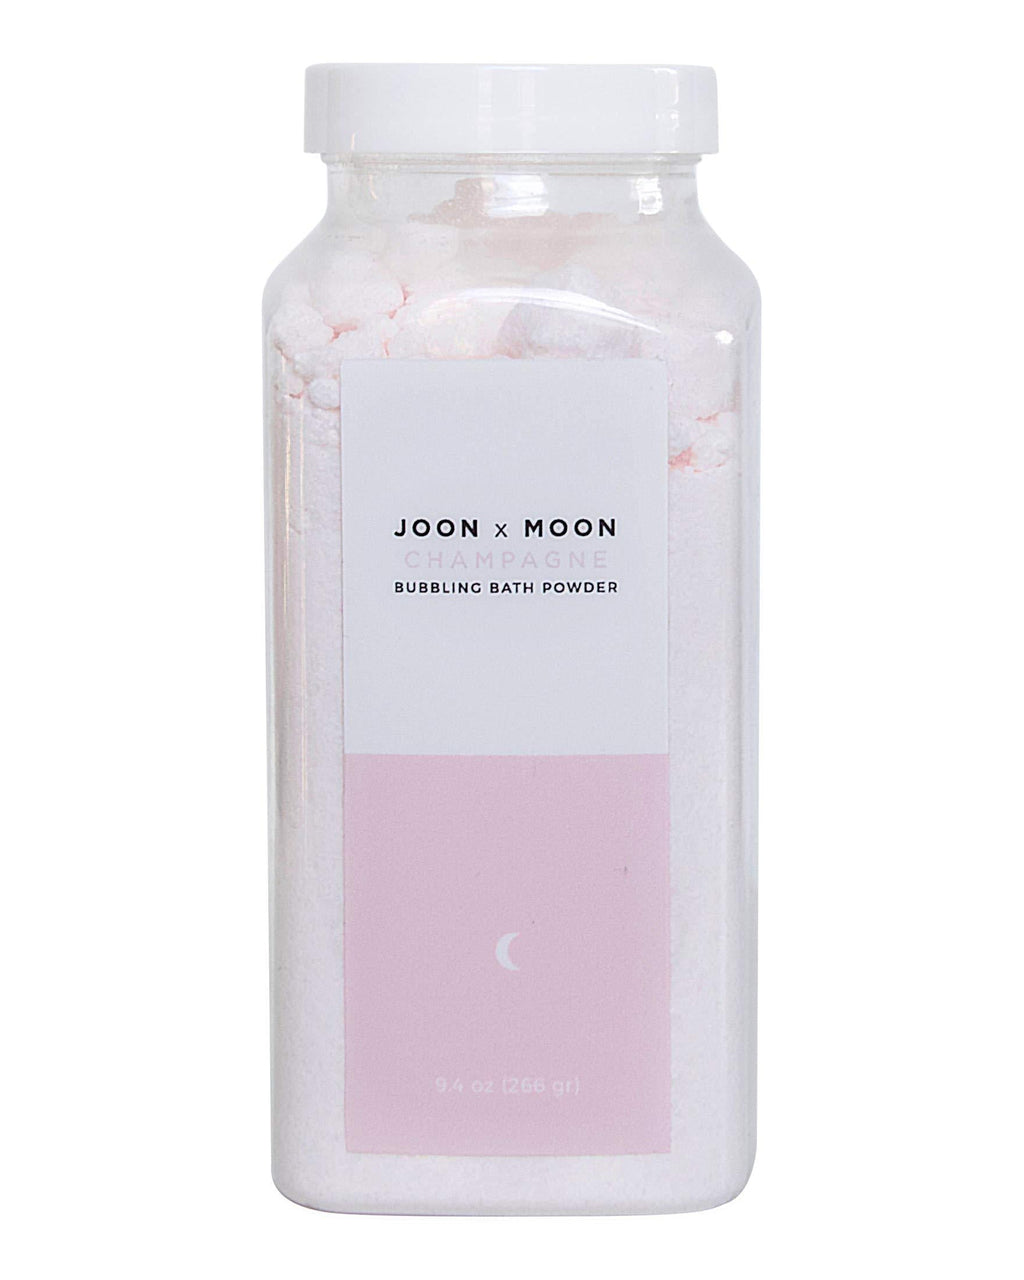 [Australia] - JOON X MOON Bubbling Bath Fizz, (Champagne, 1 Pack), Soothing Bath Soak for Relaxation and Hydrated Skin, Shea Butter, Coconut Oil and Vitamin E for a Nourishing Bubble Bath, 9 oz 9.4 Ounce (Pack of 1) 